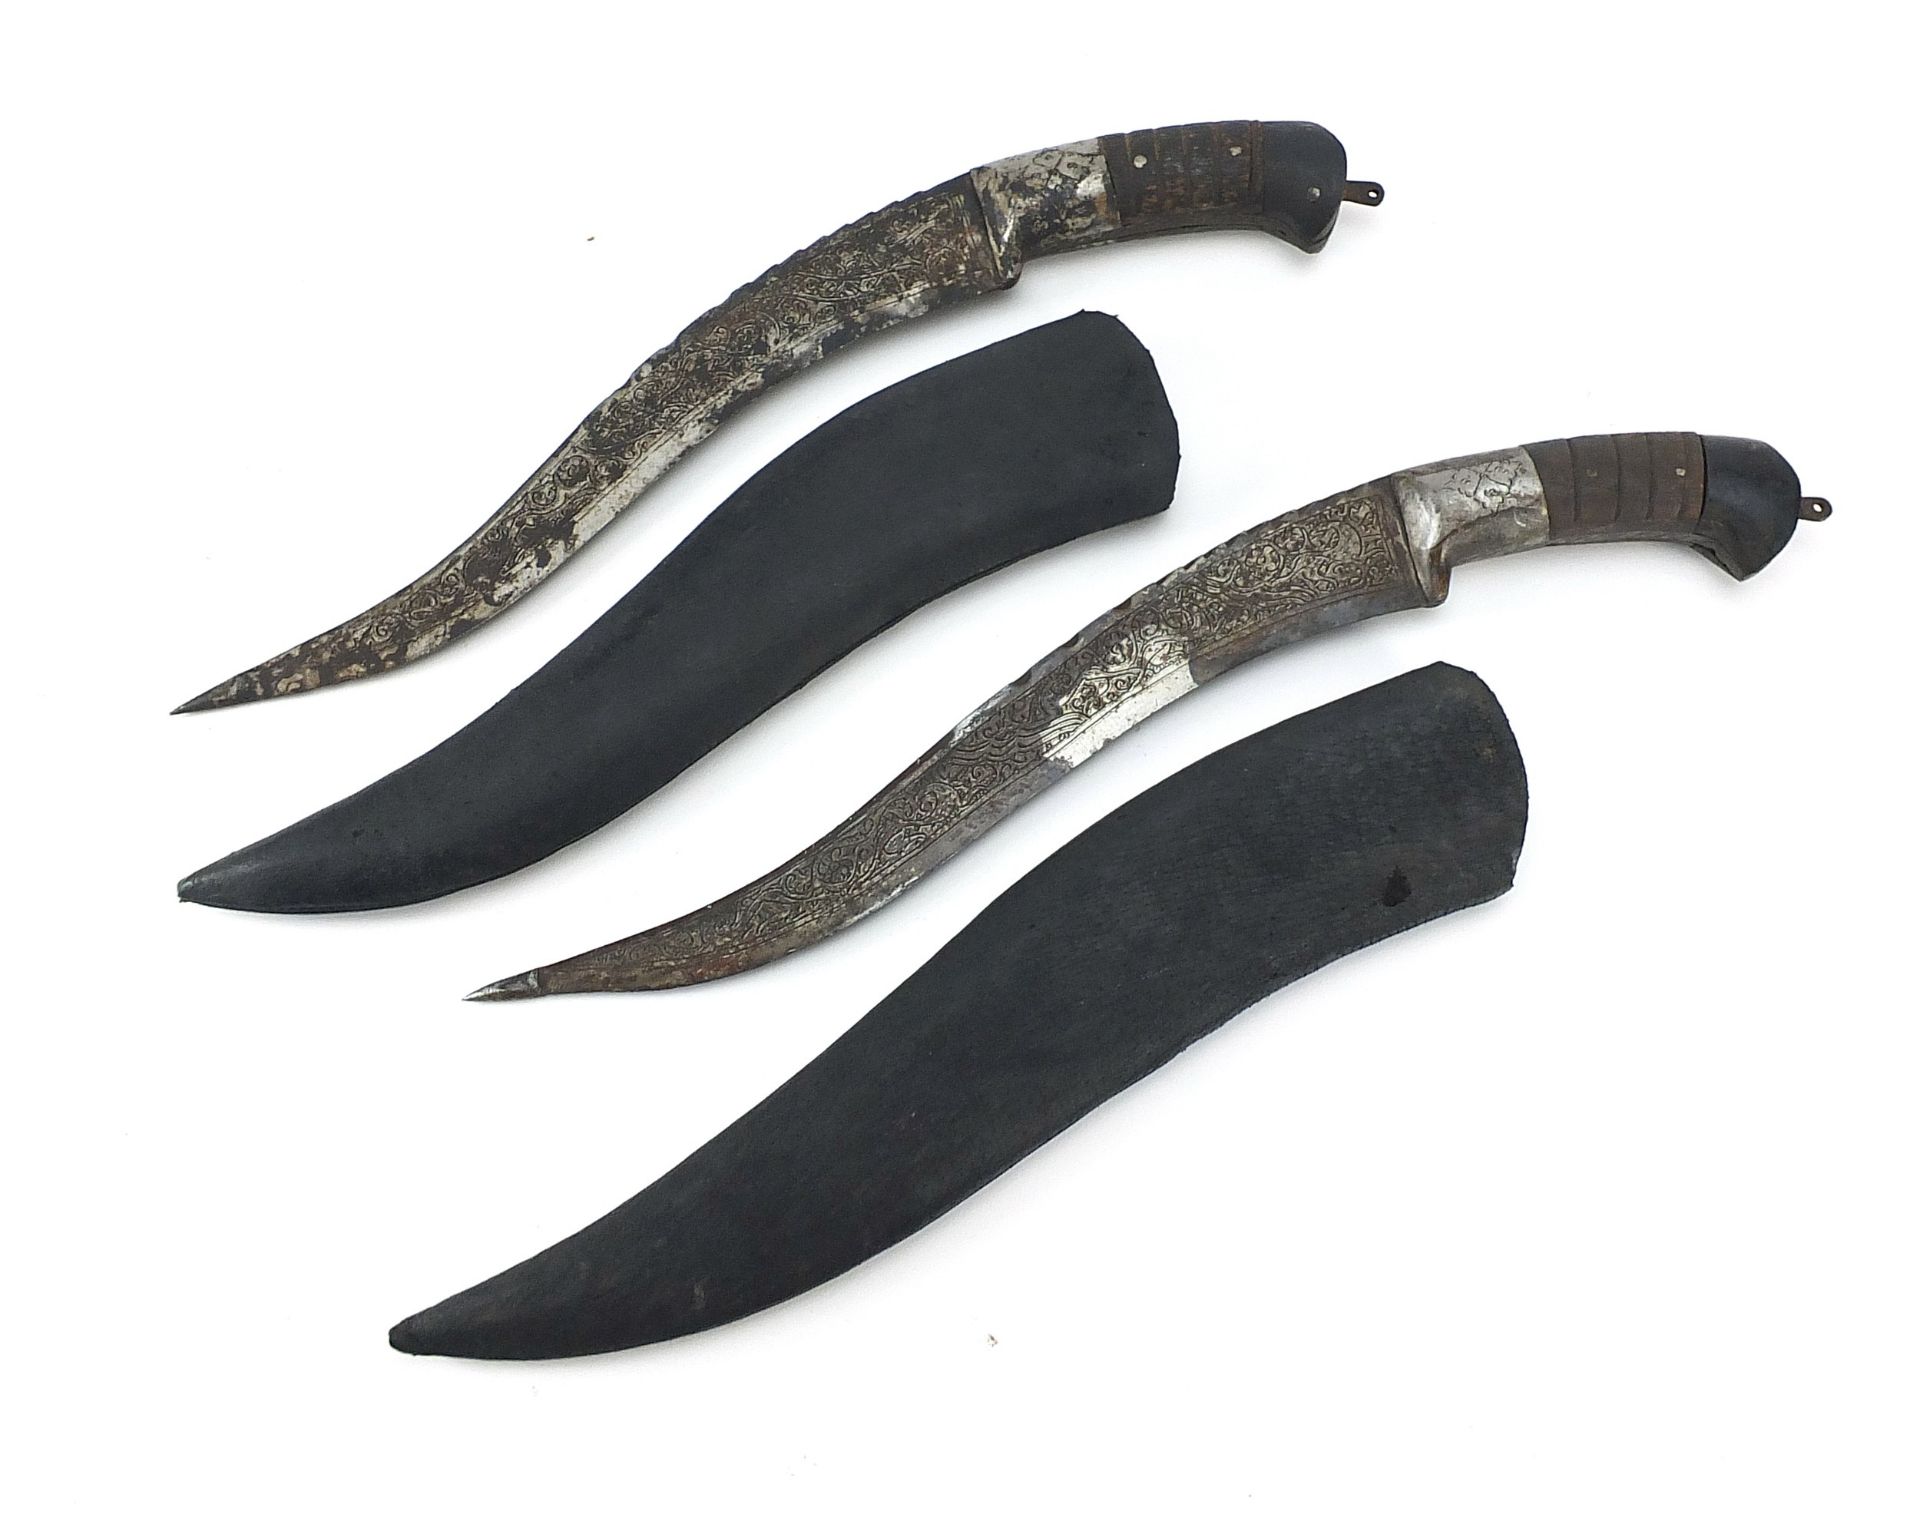 Two Afghan pesh-kabz knives with sheaths and engraved steel blades, 40cm and 38cm in length